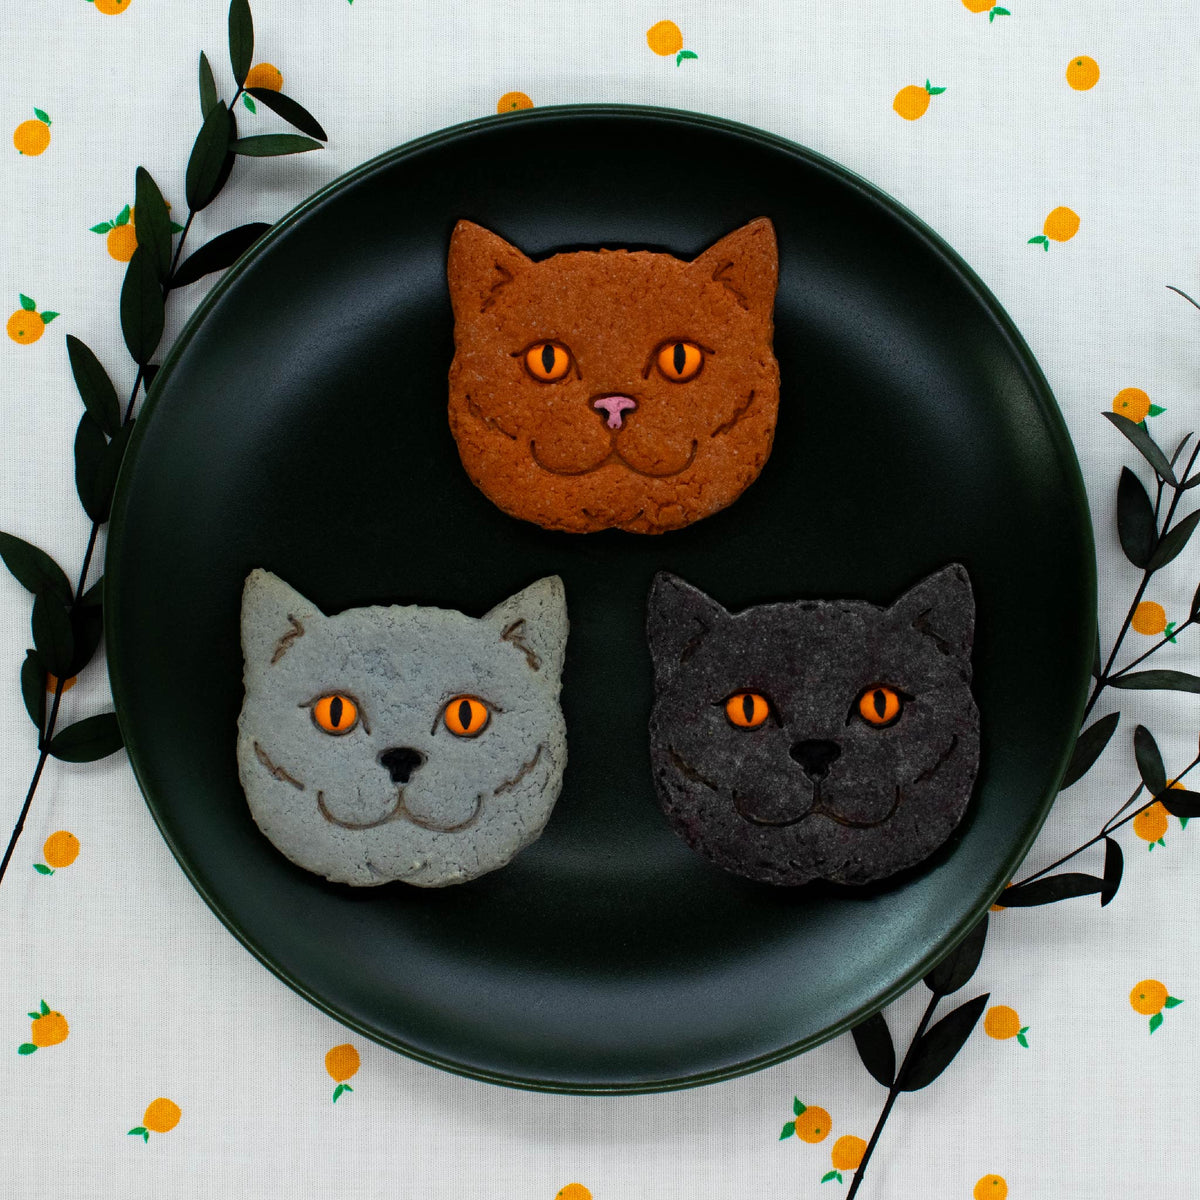 British shorthair cookies decorated with royal icing, made with Bakerlogy british shorthair cat cookie cutter